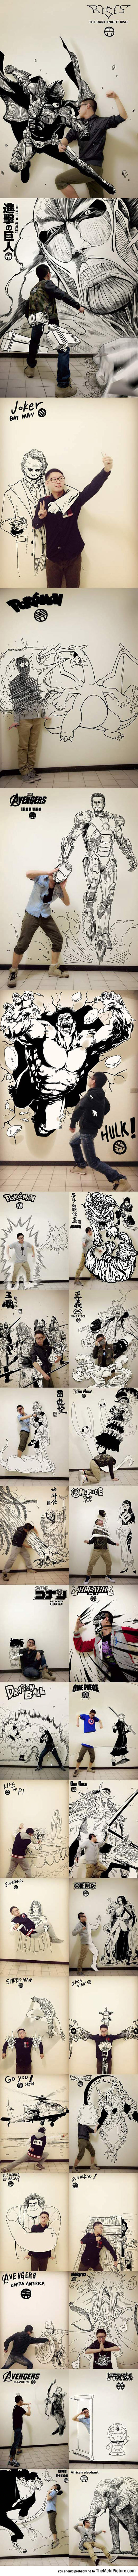 Epic Asian Man Draws Himself With Comic Book Characters